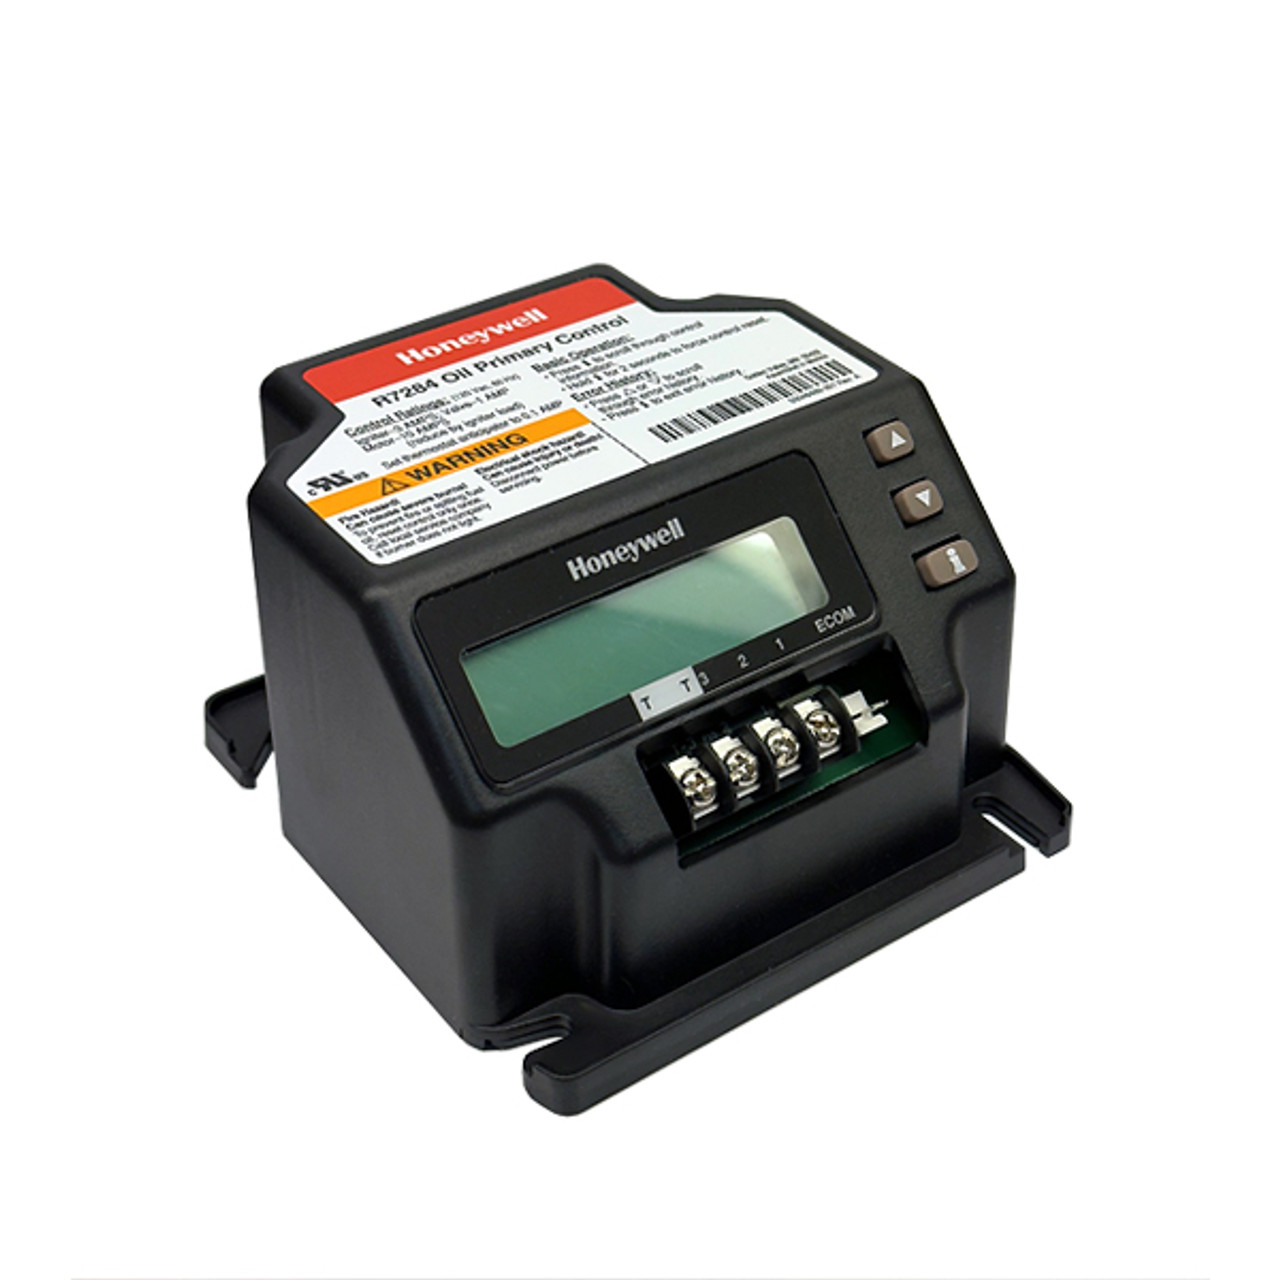 Honeywell - R7284 Electronic Oil Primary Control, EnviraCOM Enabled